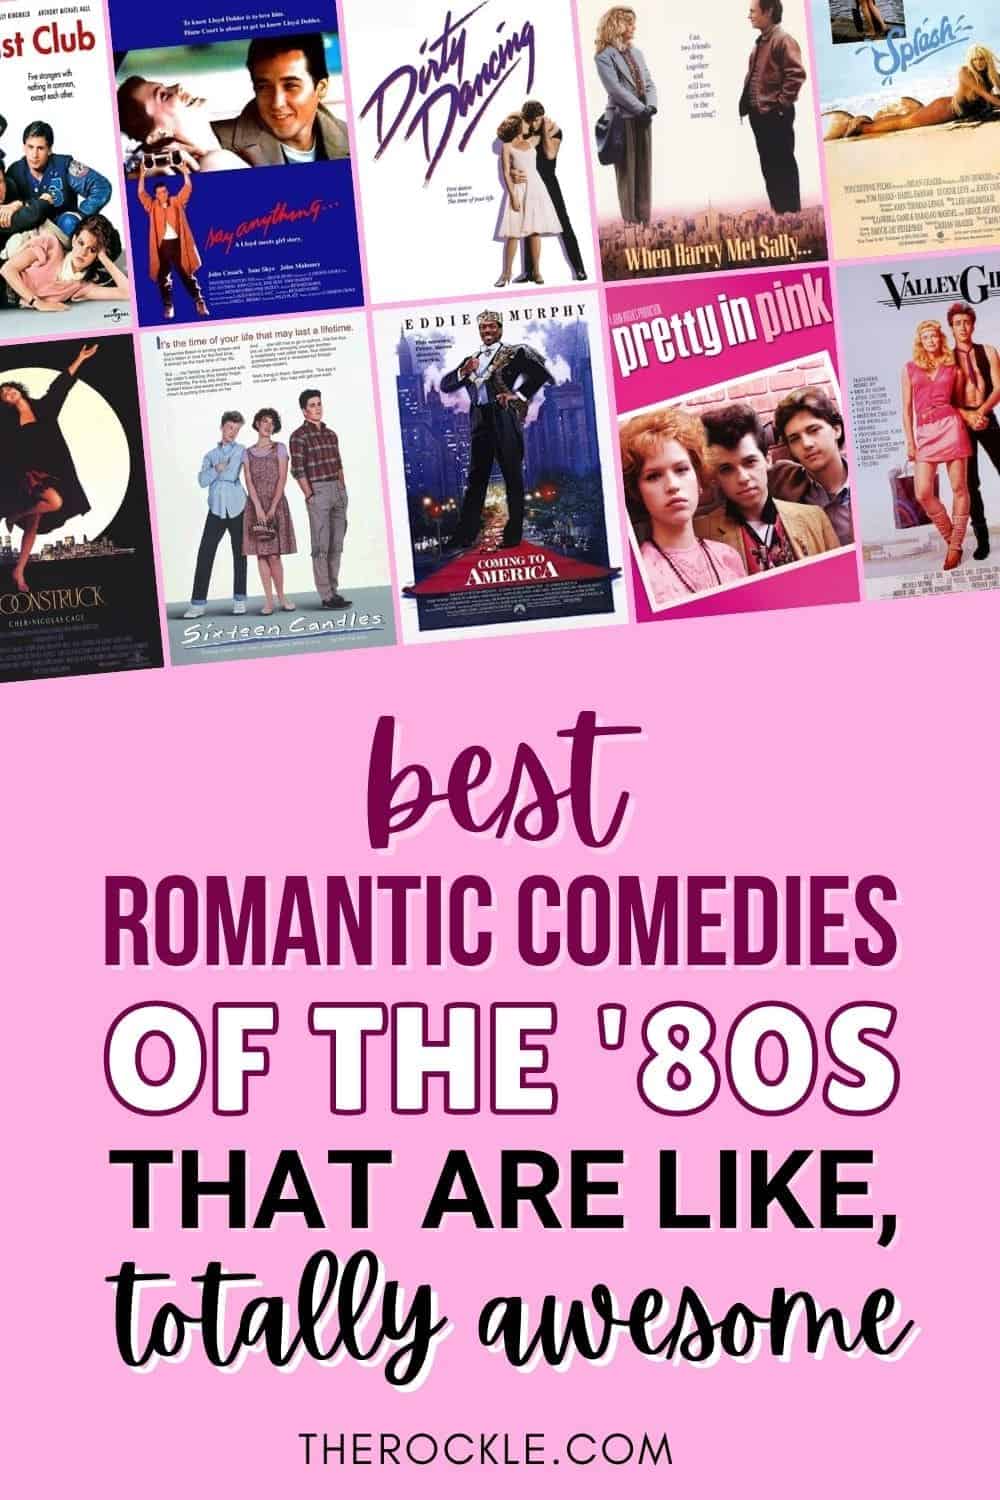 The Best Romantic Comedies Of The 80s Pinterest